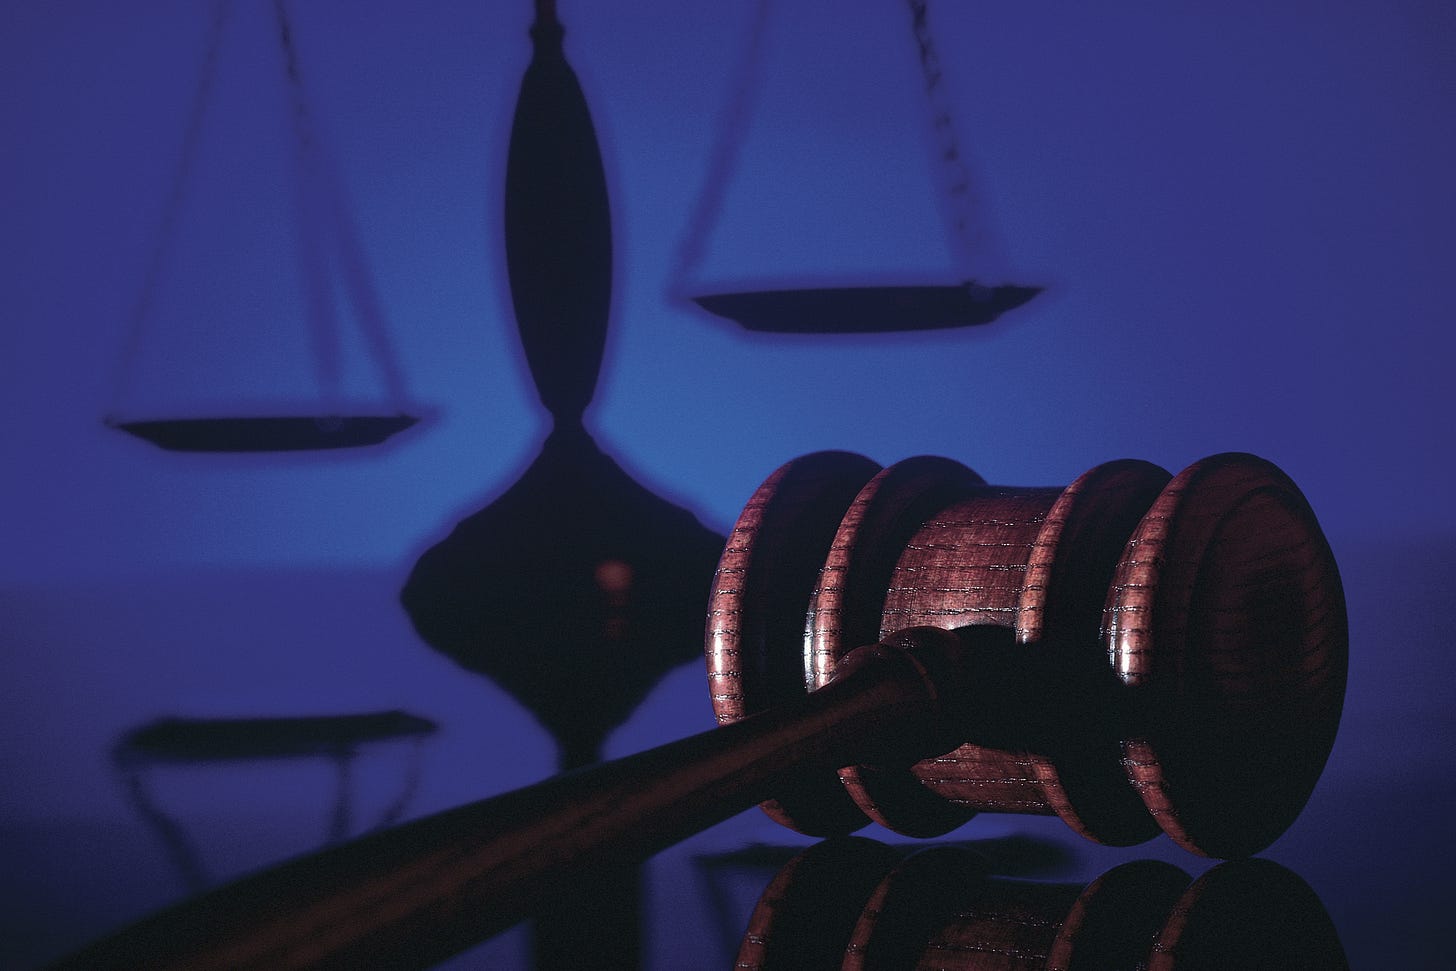 A gavel with the scales of justice in the background.